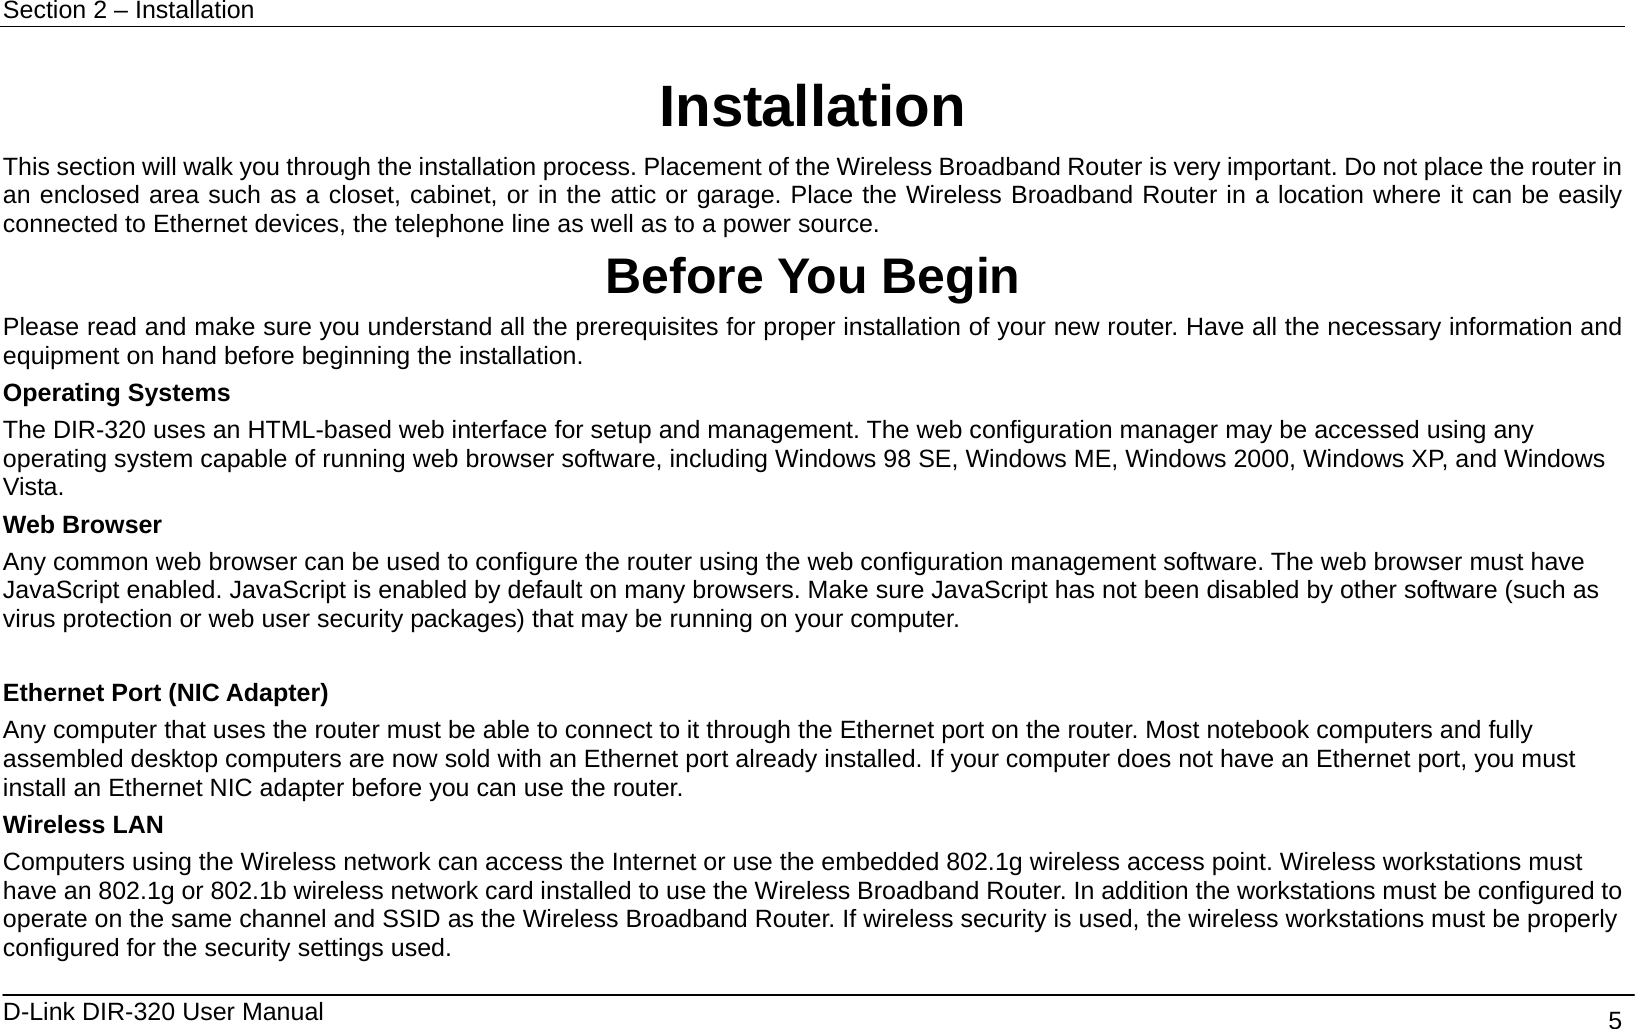 Section 2 – Installation   D-Link DIR-320 User Manual                                       5 Installation This section will walk you through the installation process. Placement of the Wireless Broadband Router is very important. Do not place the router in an enclosed area such as a closet, cabinet, or in the attic or garage. Place the Wireless Broadband Router in a location where it can be easily connected to Ethernet devices, the telephone line as well as to a power source. Before You Begin Please read and make sure you understand all the prerequisites for proper installation of your new router. Have all the necessary information and equipment on hand before beginning the installation. Operating Systems The DIR-320 uses an HTML-based web interface for setup and management. The web configuration manager may be accessed using any operating system capable of running web browser software, including Windows 98 SE, Windows ME, Windows 2000, Windows XP, and Windows Vista.  Web Browser Any common web browser can be used to configure the router using the web configuration management software. The web browser must have JavaScript enabled. JavaScript is enabled by default on many browsers. Make sure JavaScript has not been disabled by other software (such as virus protection or web user security packages) that may be running on your computer.  Ethernet Port (NIC Adapter) Any computer that uses the router must be able to connect to it through the Ethernet port on the router. Most notebook computers and fully assembled desktop computers are now sold with an Ethernet port already installed. If your computer does not have an Ethernet port, you must install an Ethernet NIC adapter before you can use the router. Wireless LAN Computers using the Wireless network can access the Internet or use the embedded 802.1g wireless access point. Wireless workstations must have an 802.1g or 802.1b wireless network card installed to use the Wireless Broadband Router. In addition the workstations must be configured to operate on the same channel and SSID as the Wireless Broadband Router. If wireless security is used, the wireless workstations must be properly configured for the security settings used. 